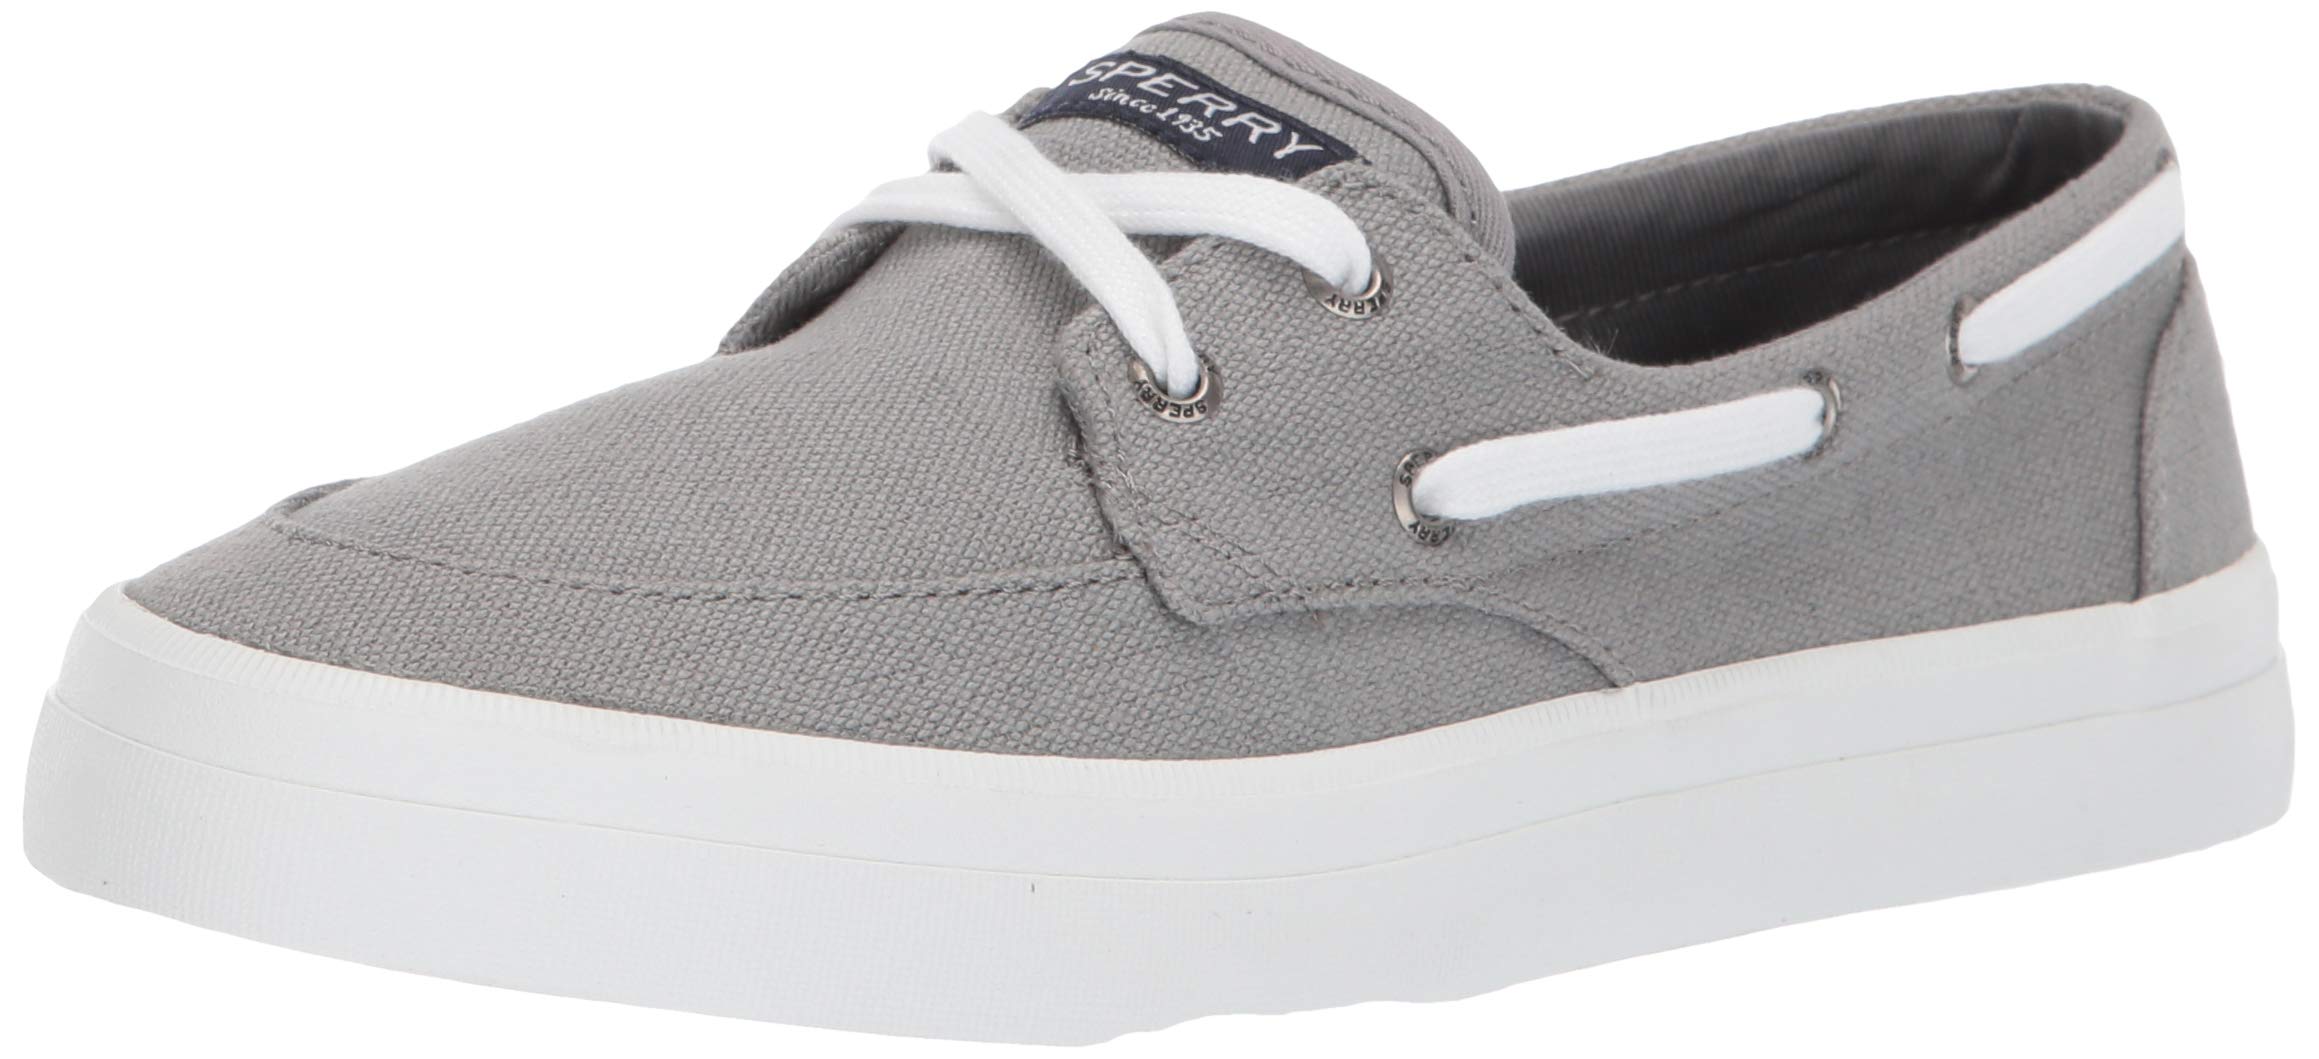 Sperry STS83205: Women's Crest Boat Grey Shoes | eBay